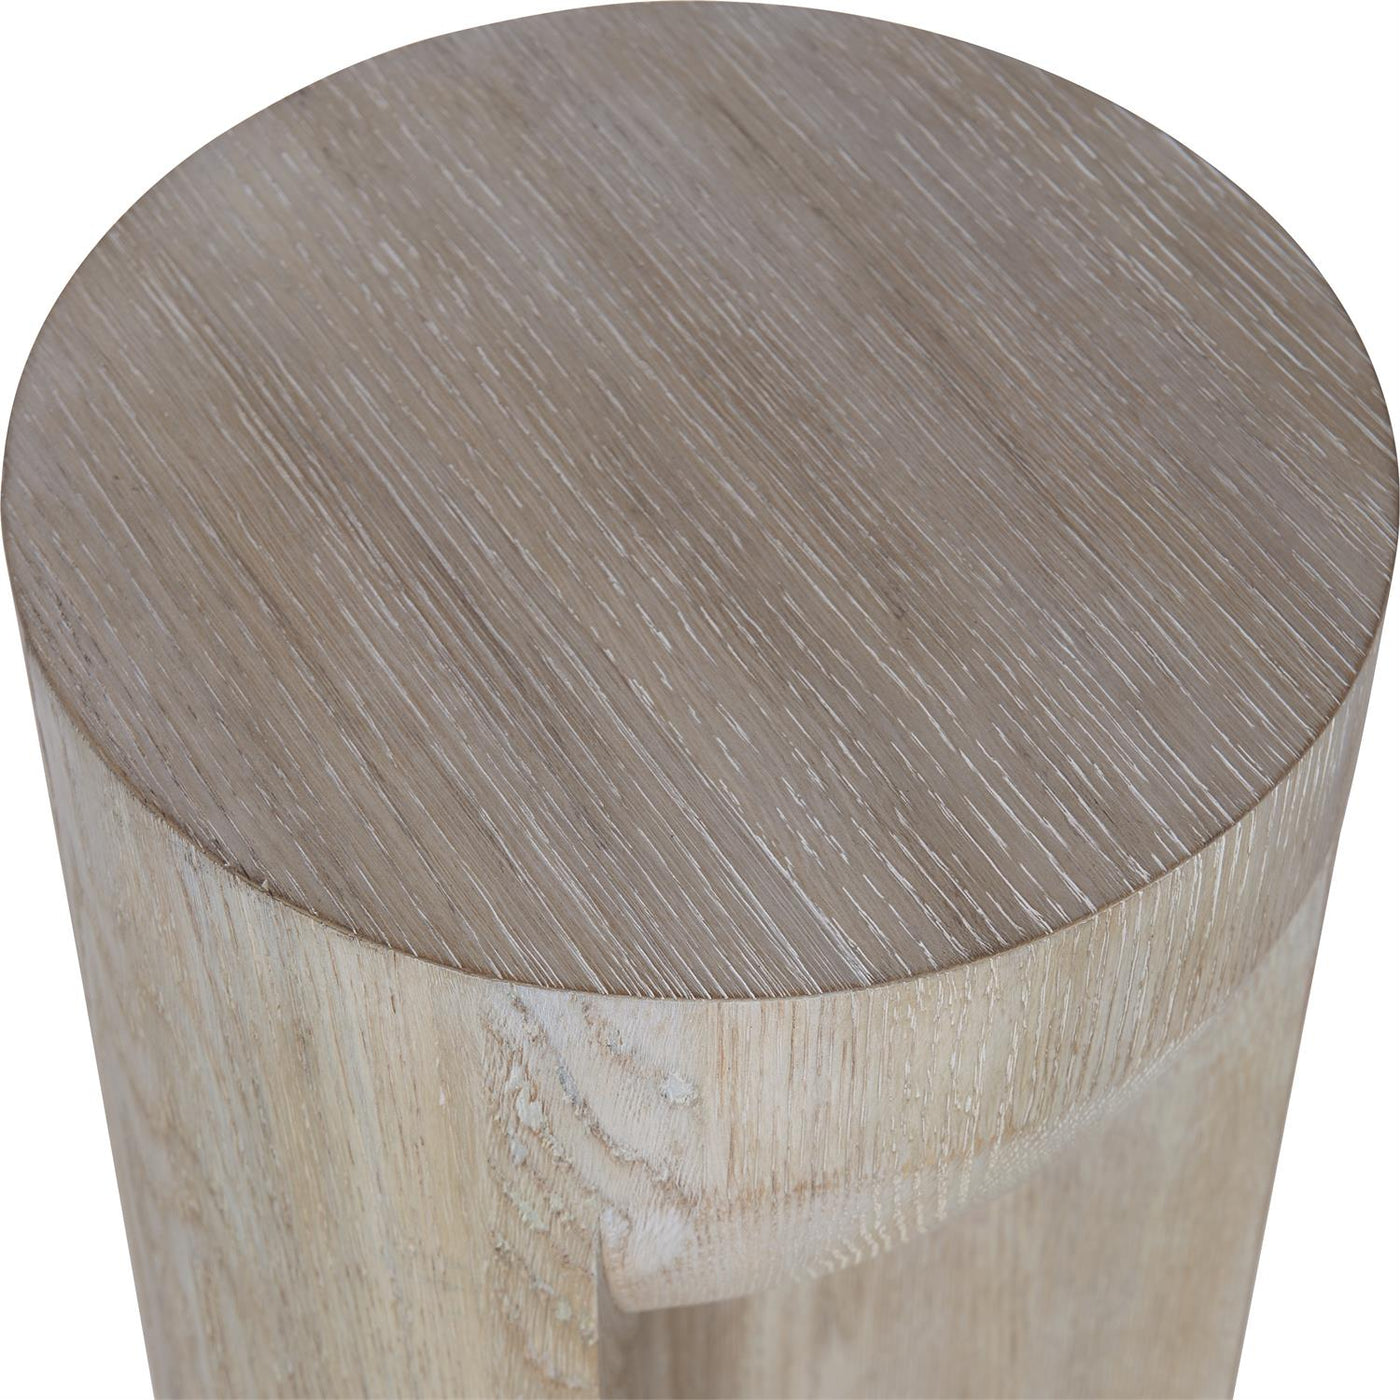 TABLE ROUND WOOD SCULPTURE